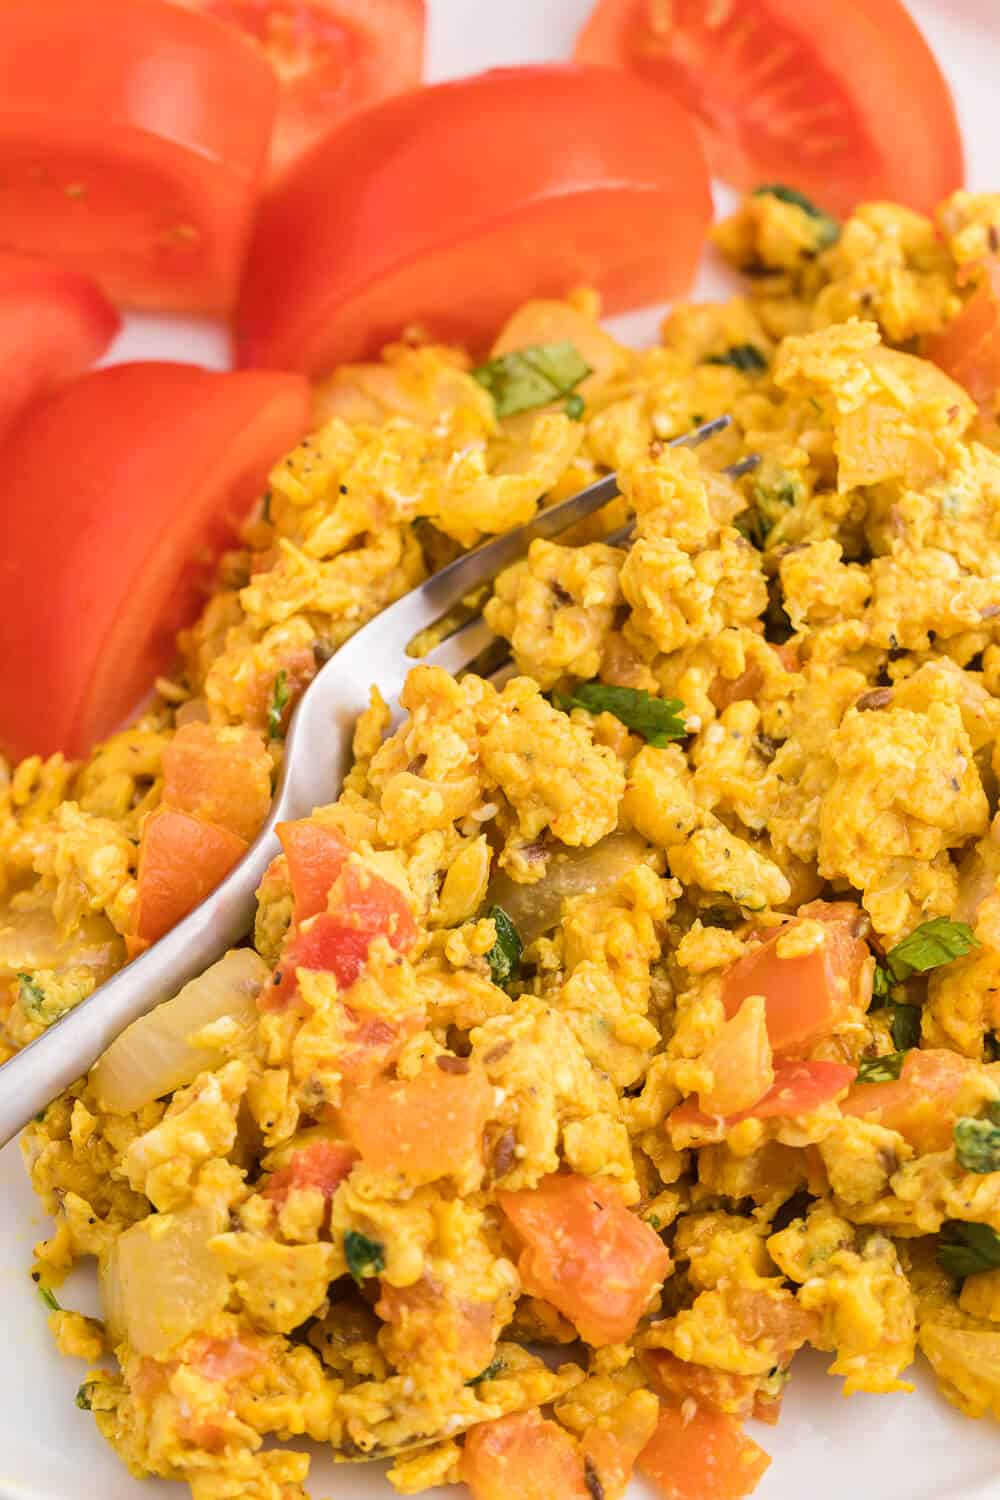 Indian Scrambled Eggs - Bring Indian seasonings to the breakfast table! This quick morning staple is packed with cumin, onion, green chiles, tomatoes, turmeric, and cilantro.